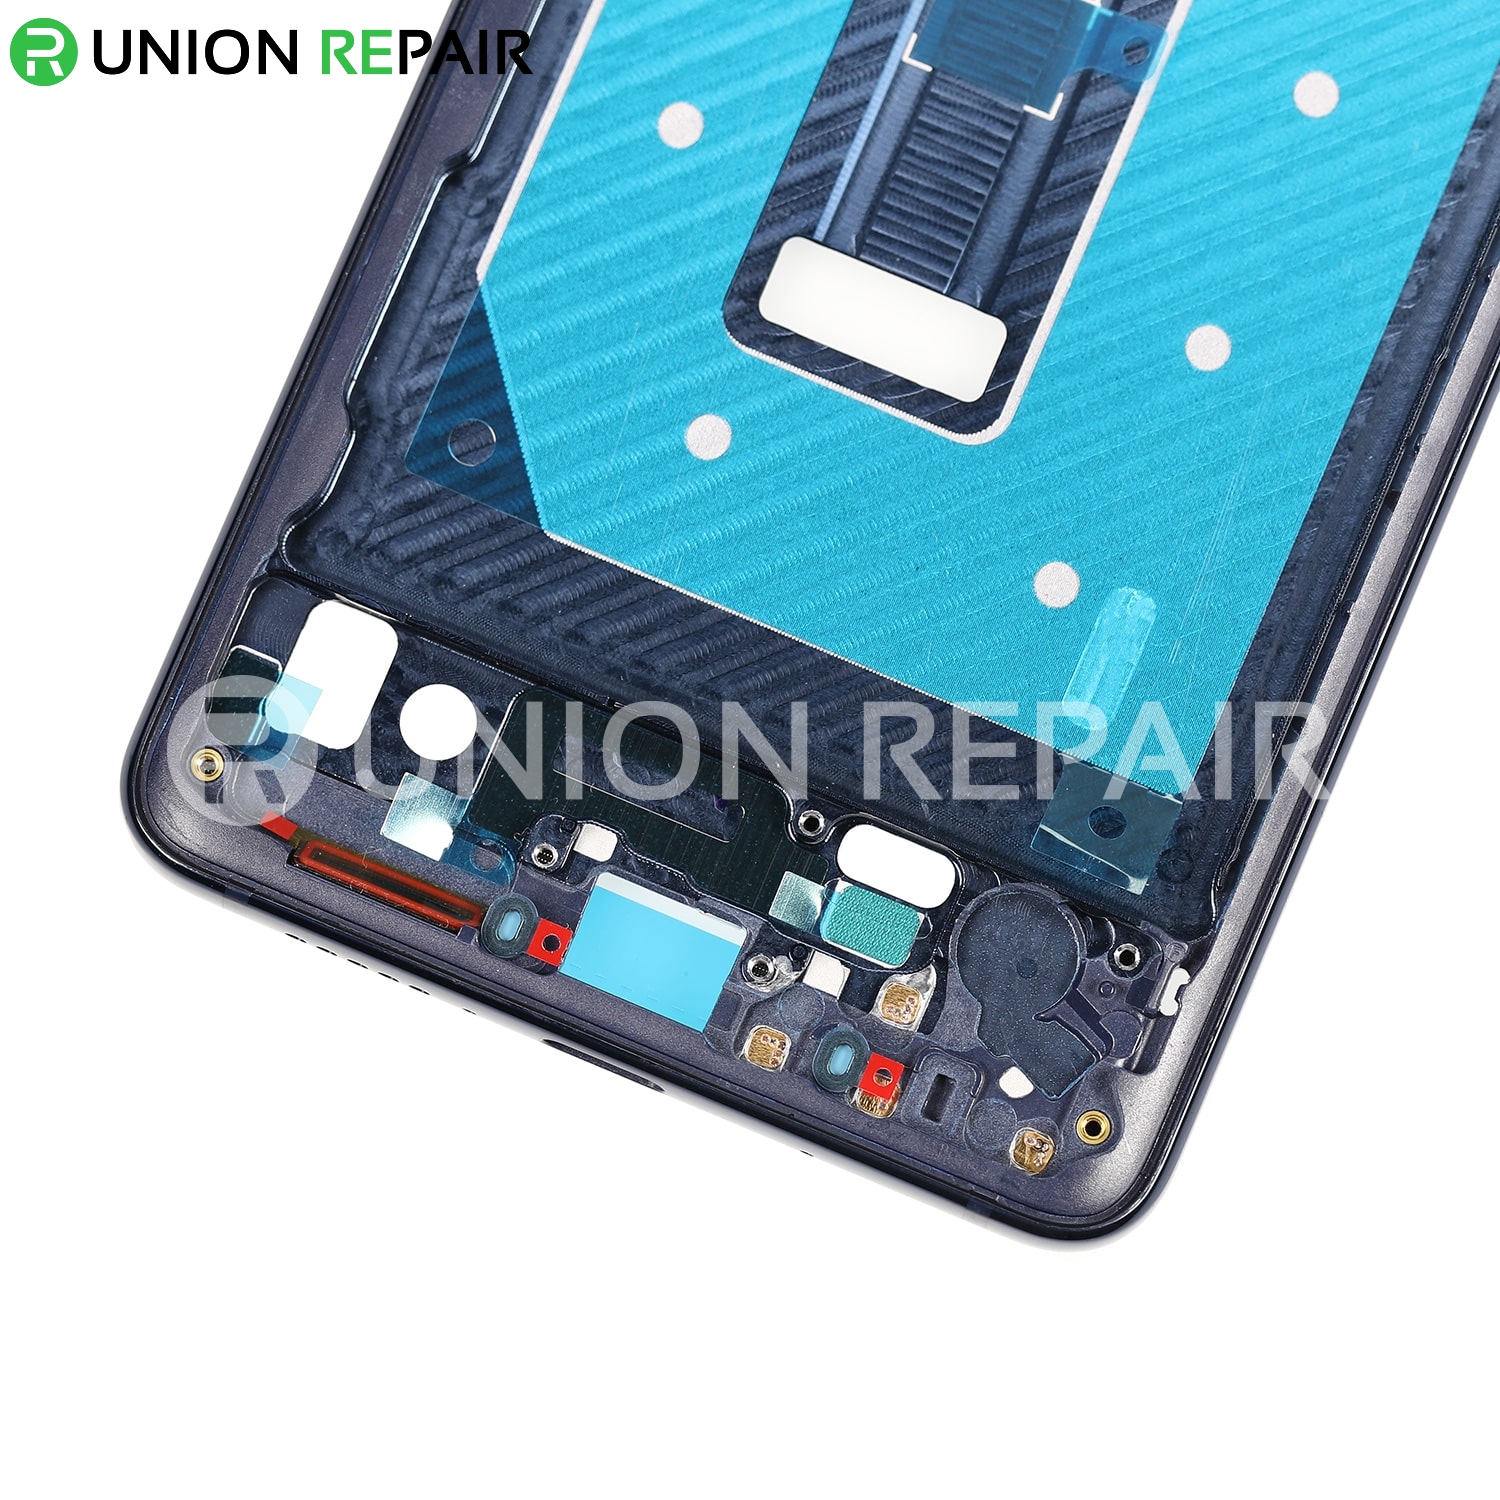 Huawei Honor Magic 2 Front Housing LCD Frame Bezel Plate with Side Keys